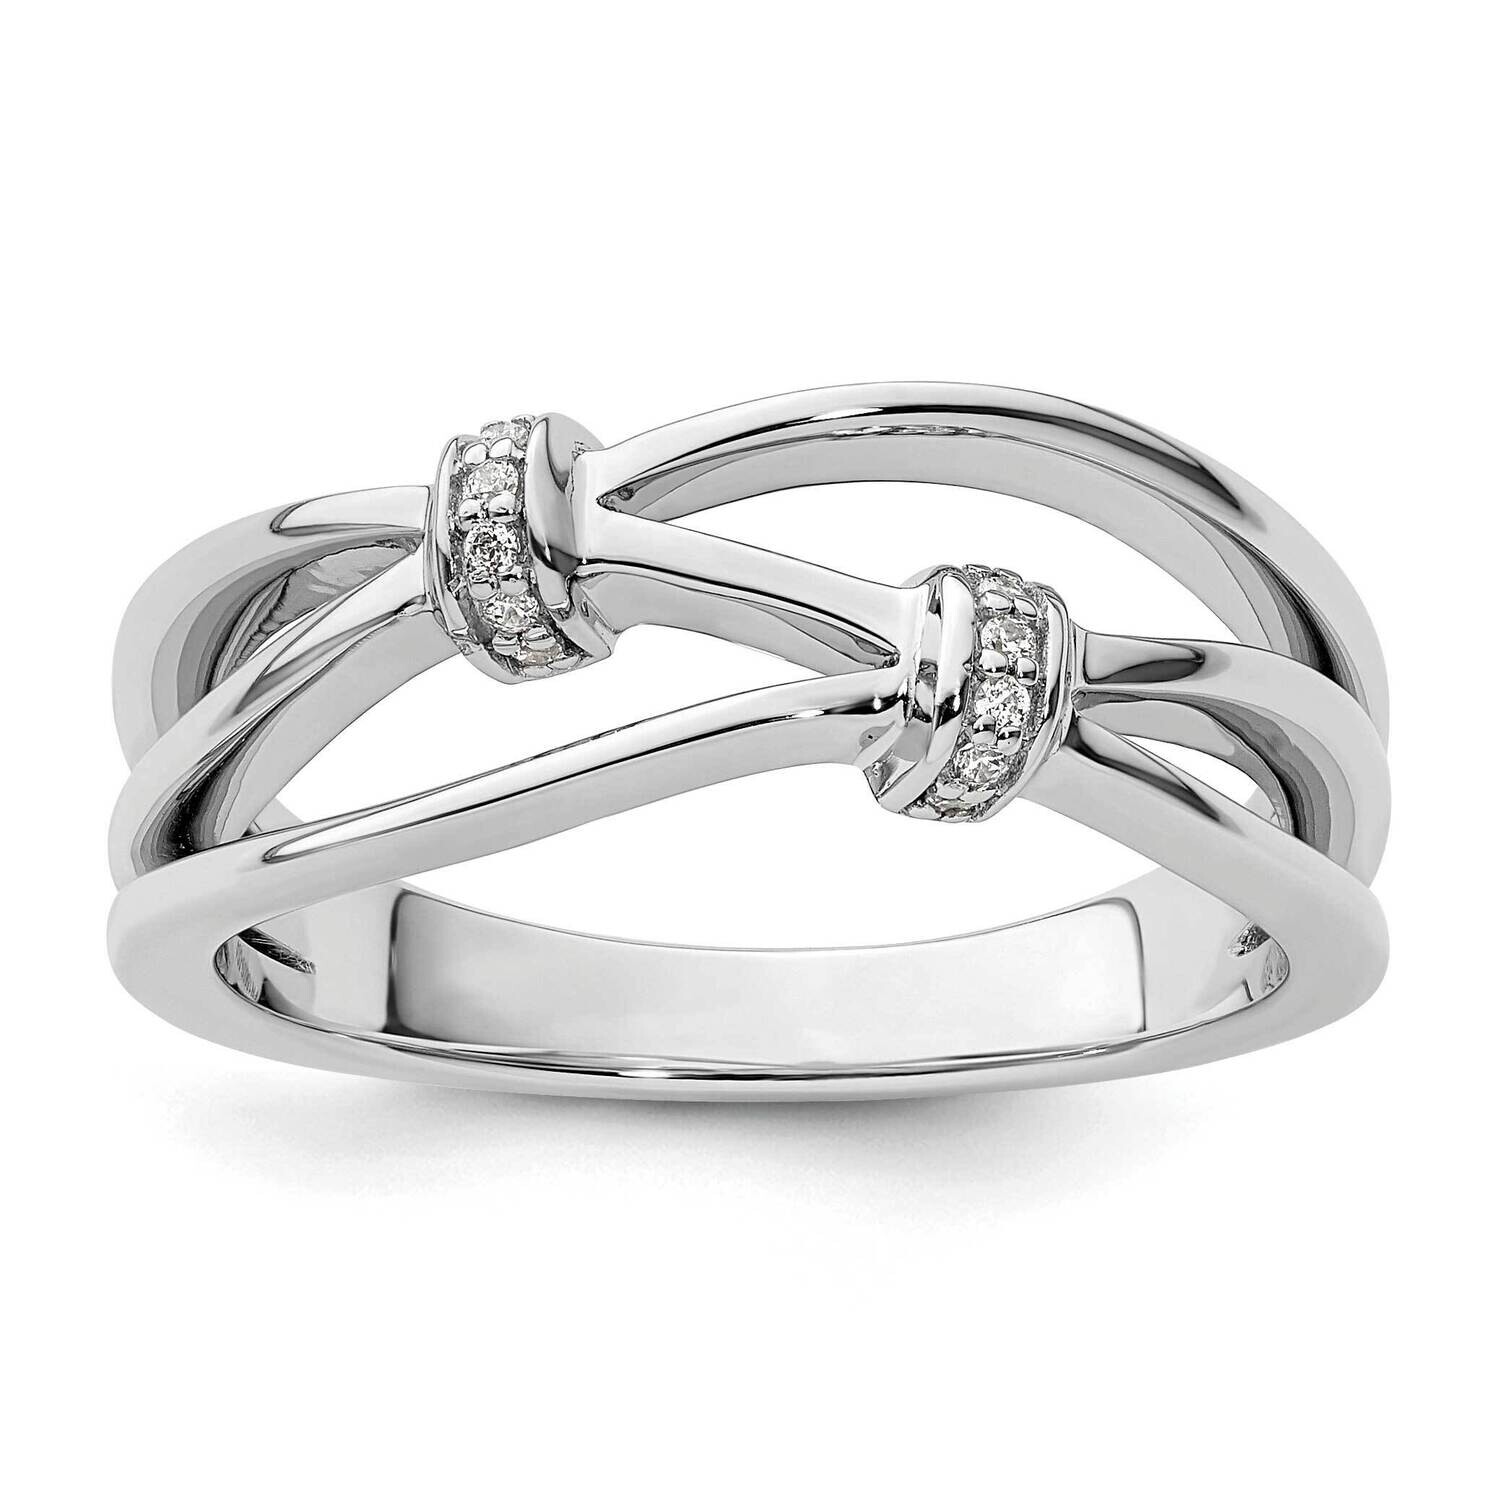 White Ice Diamond Criss Cross Ring Sterling Silver Rhodium-Plated QW500